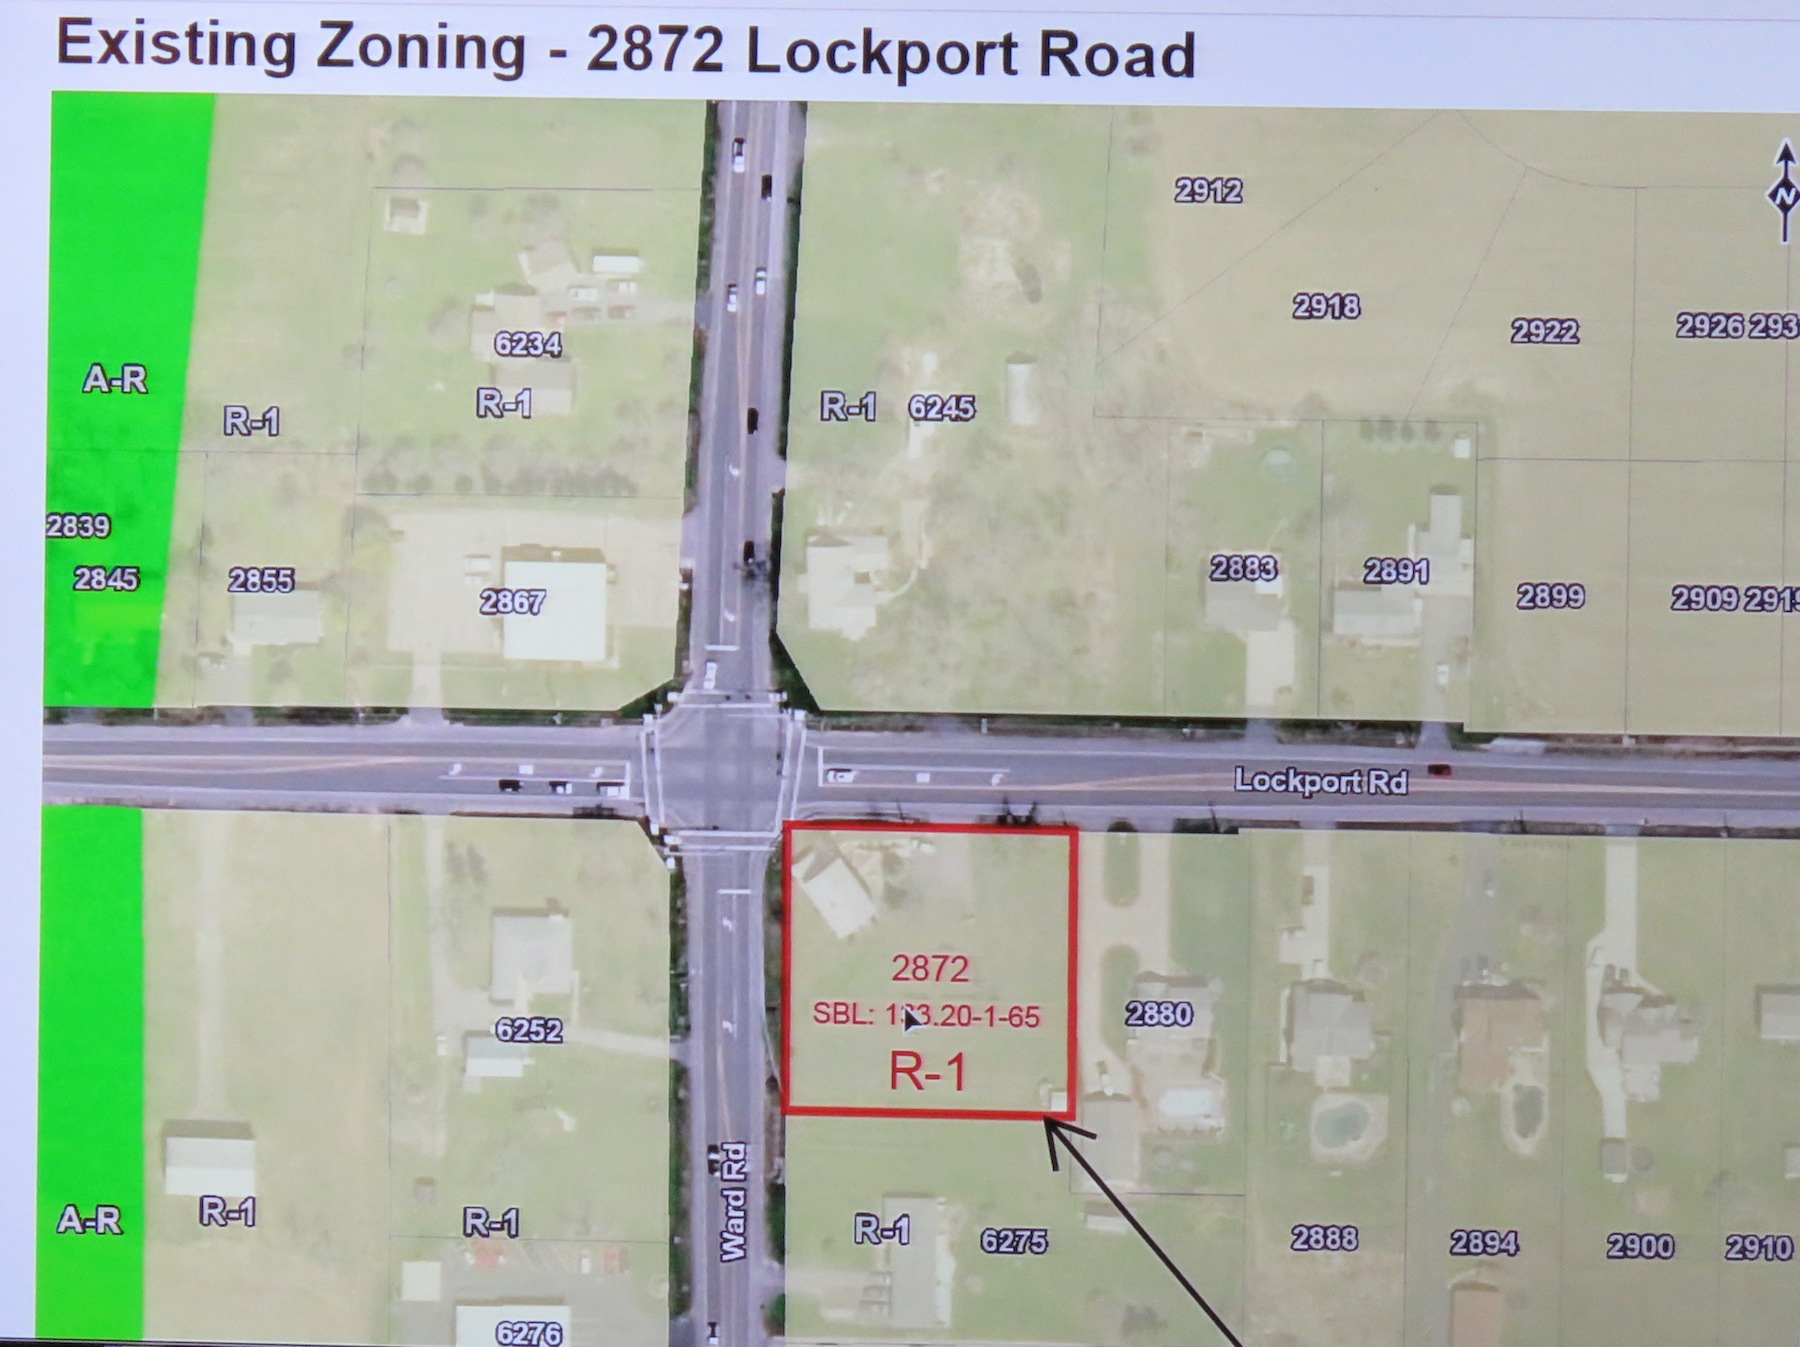 A display from Monday's presentation presenting the rezoning of 2872 Lockport Road. The property was rezoned from R-1 residential to R-C restricted commercial. The area being rezoned is displayed inside the box. (Photo by David Yarger)